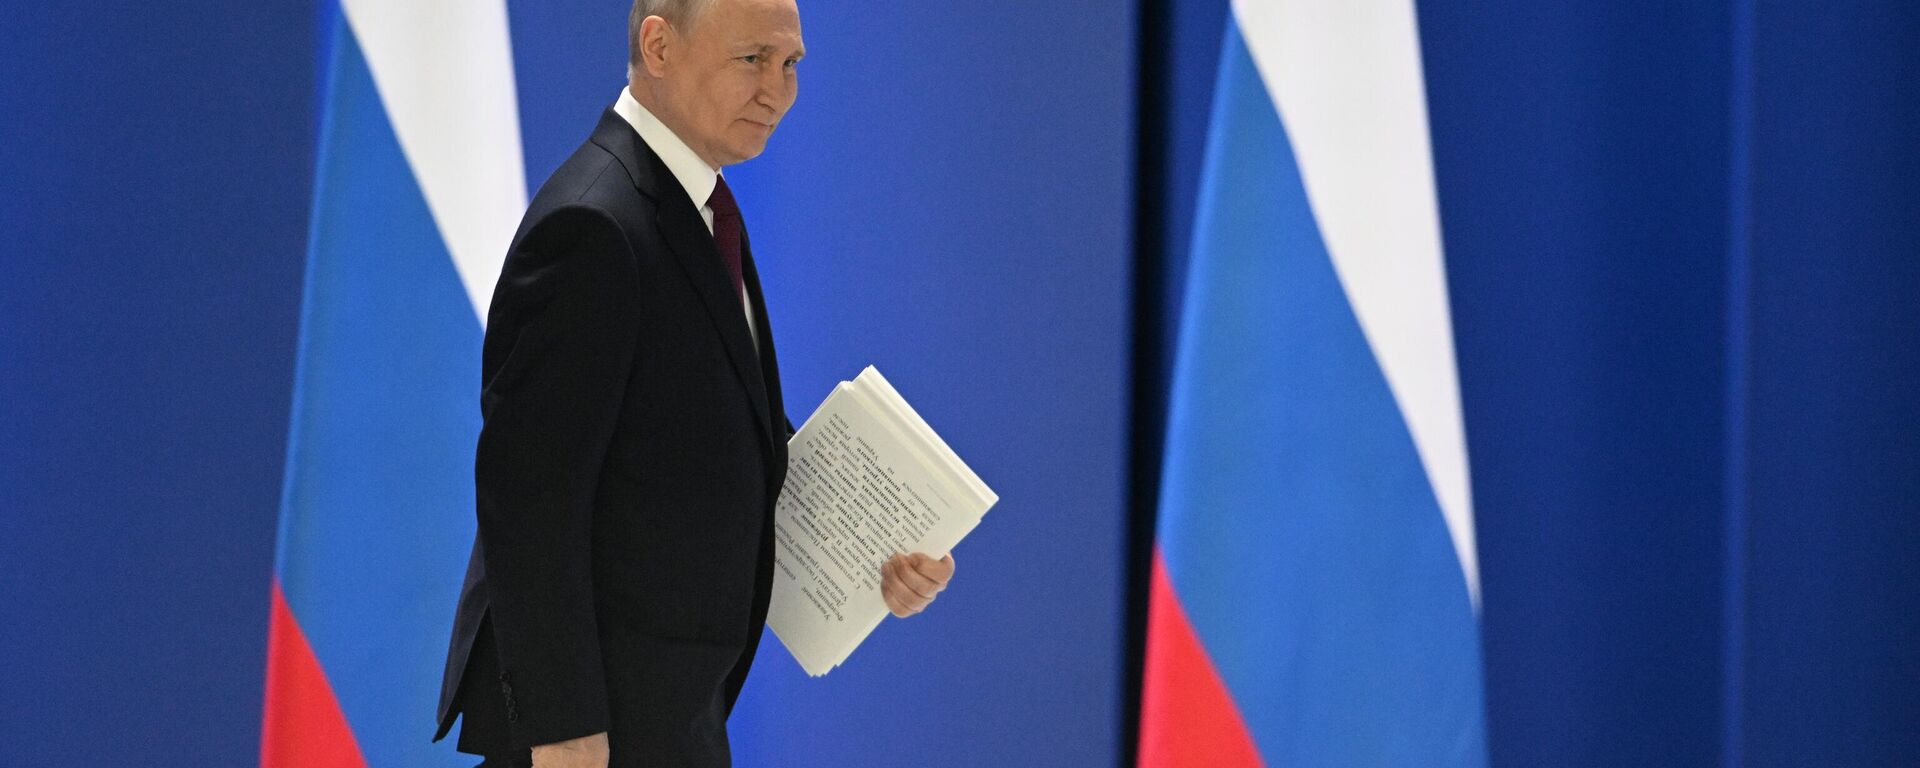 Russia's President Vladimir Putin delivers his regular address to the Federal Assembly on 21 February 2023. - Sputnik India, 1920, 21.02.2023